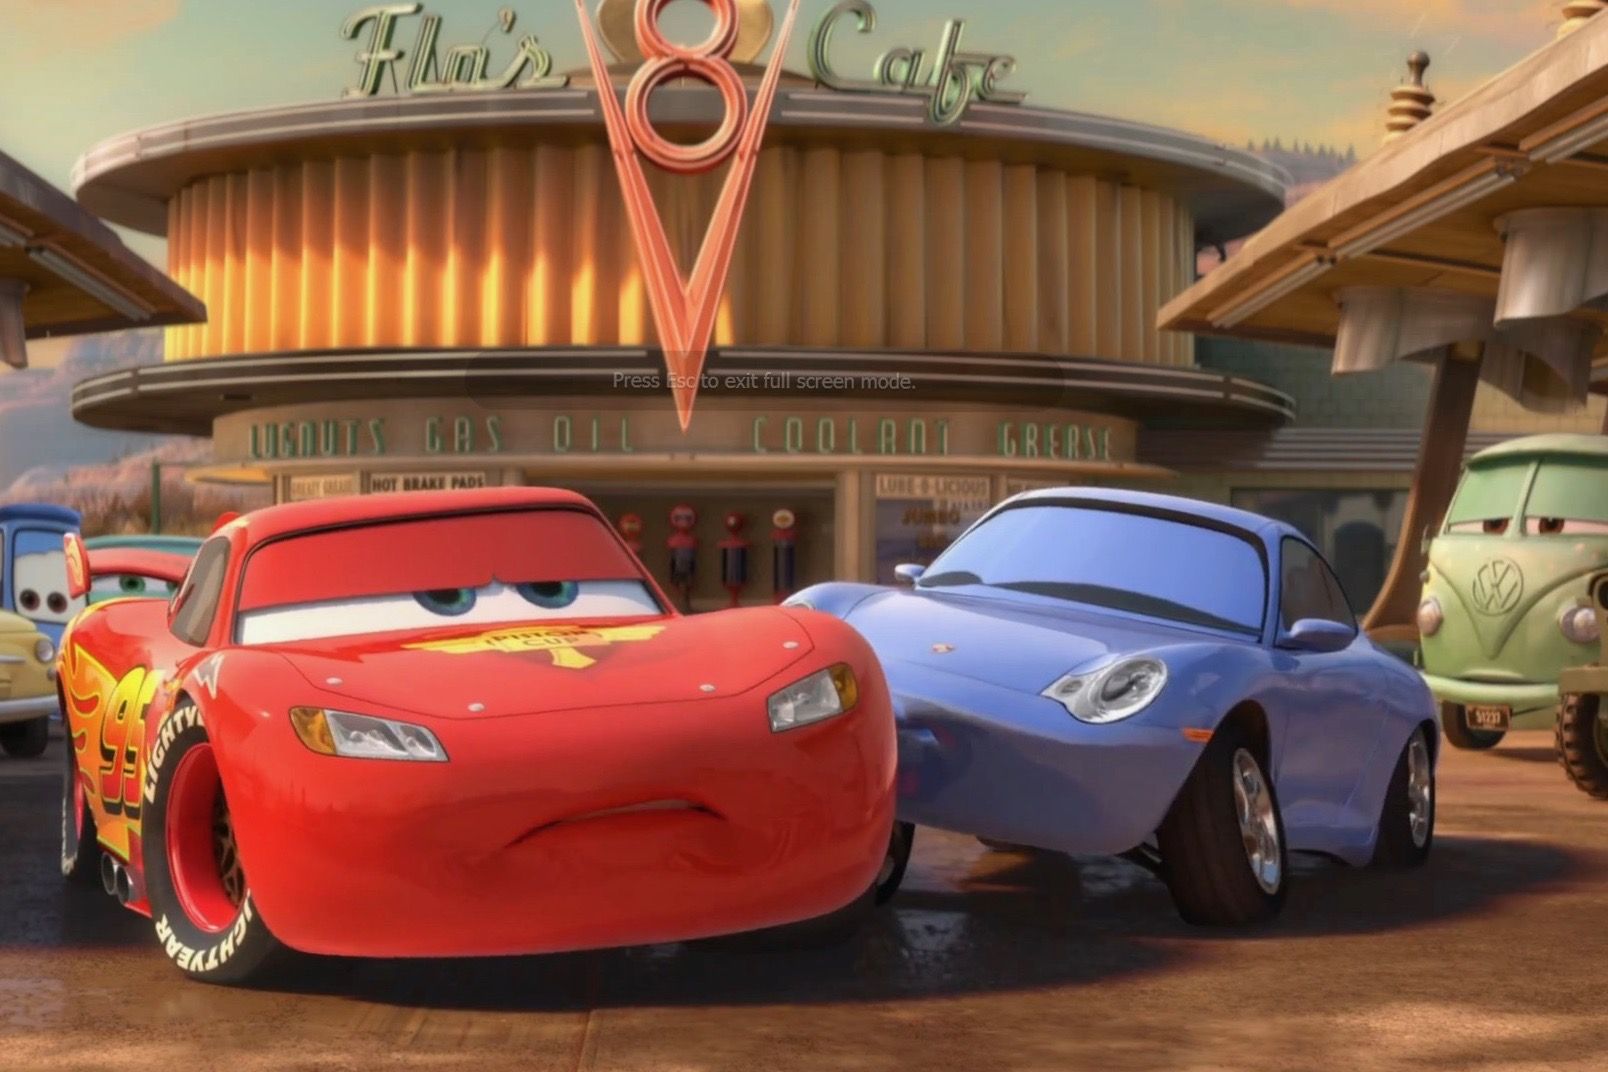 Why Cars 2 Is the Worst Pixar Movie